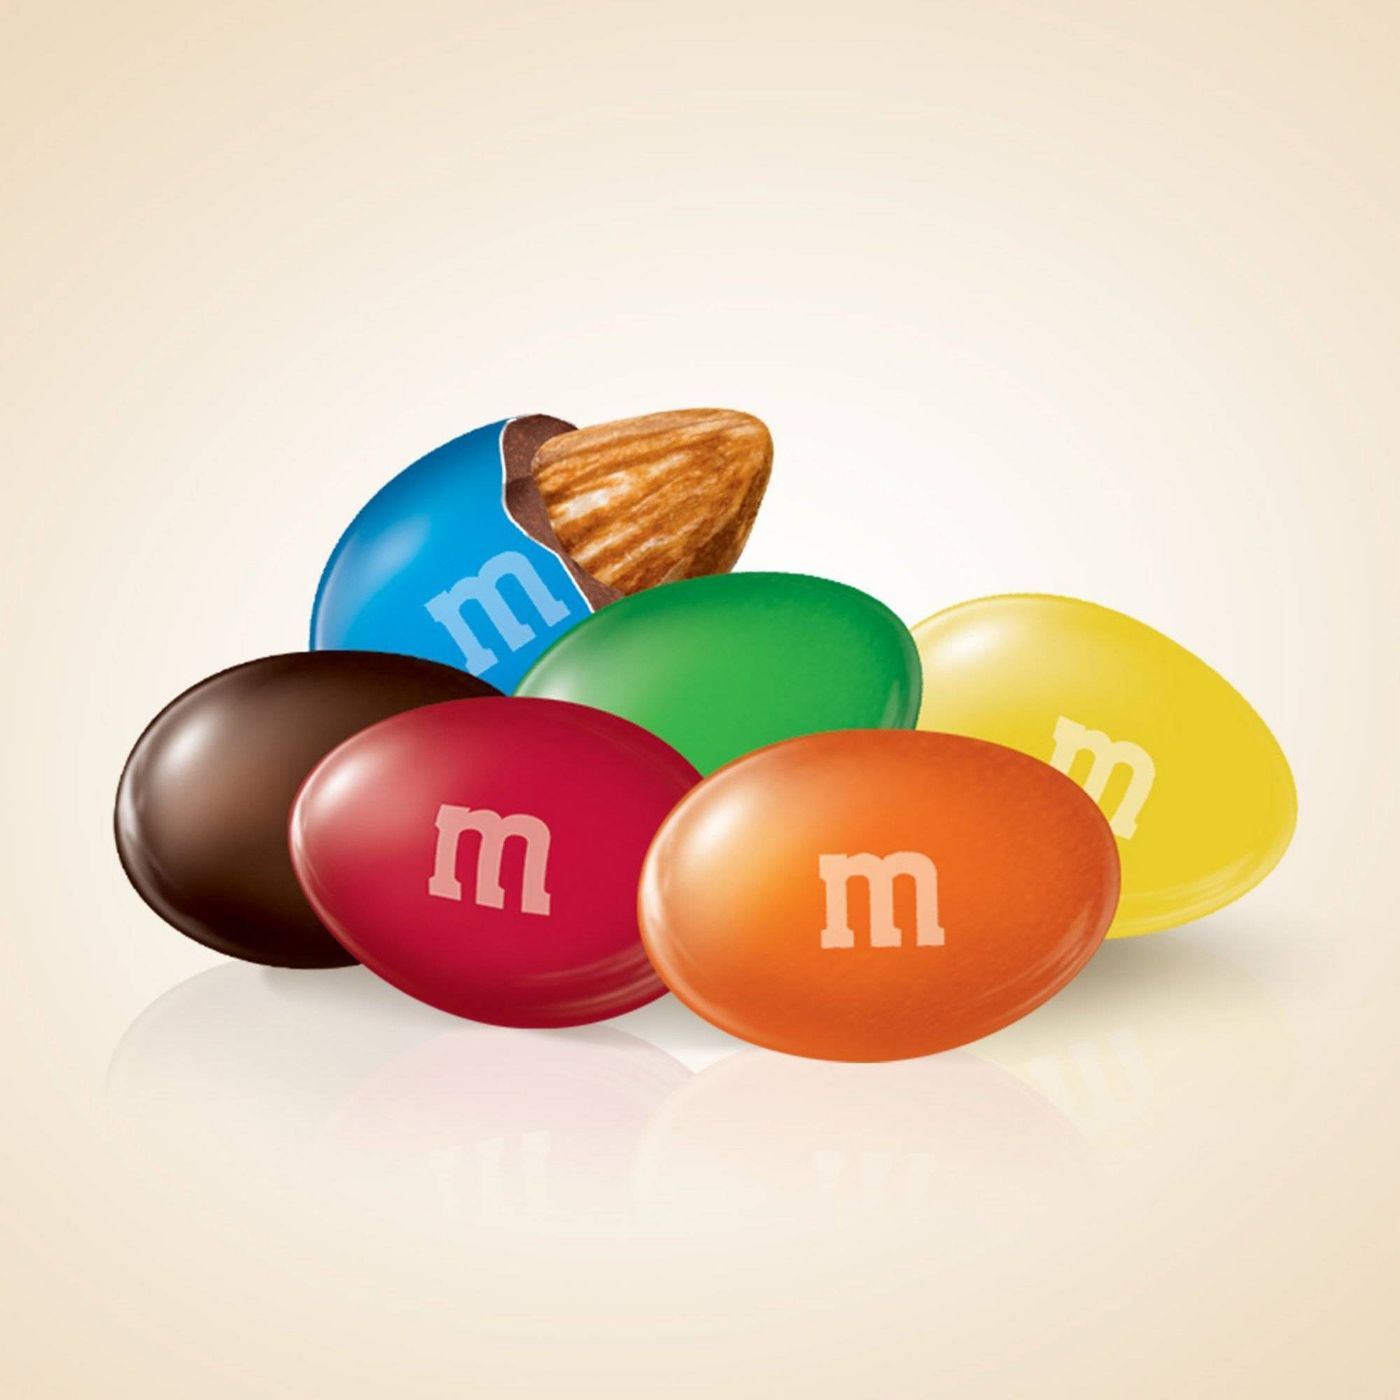  M&M'S Almond Chocolate Candy Family Size, 15.9 Ounce : Grocery  & Gourmet Food